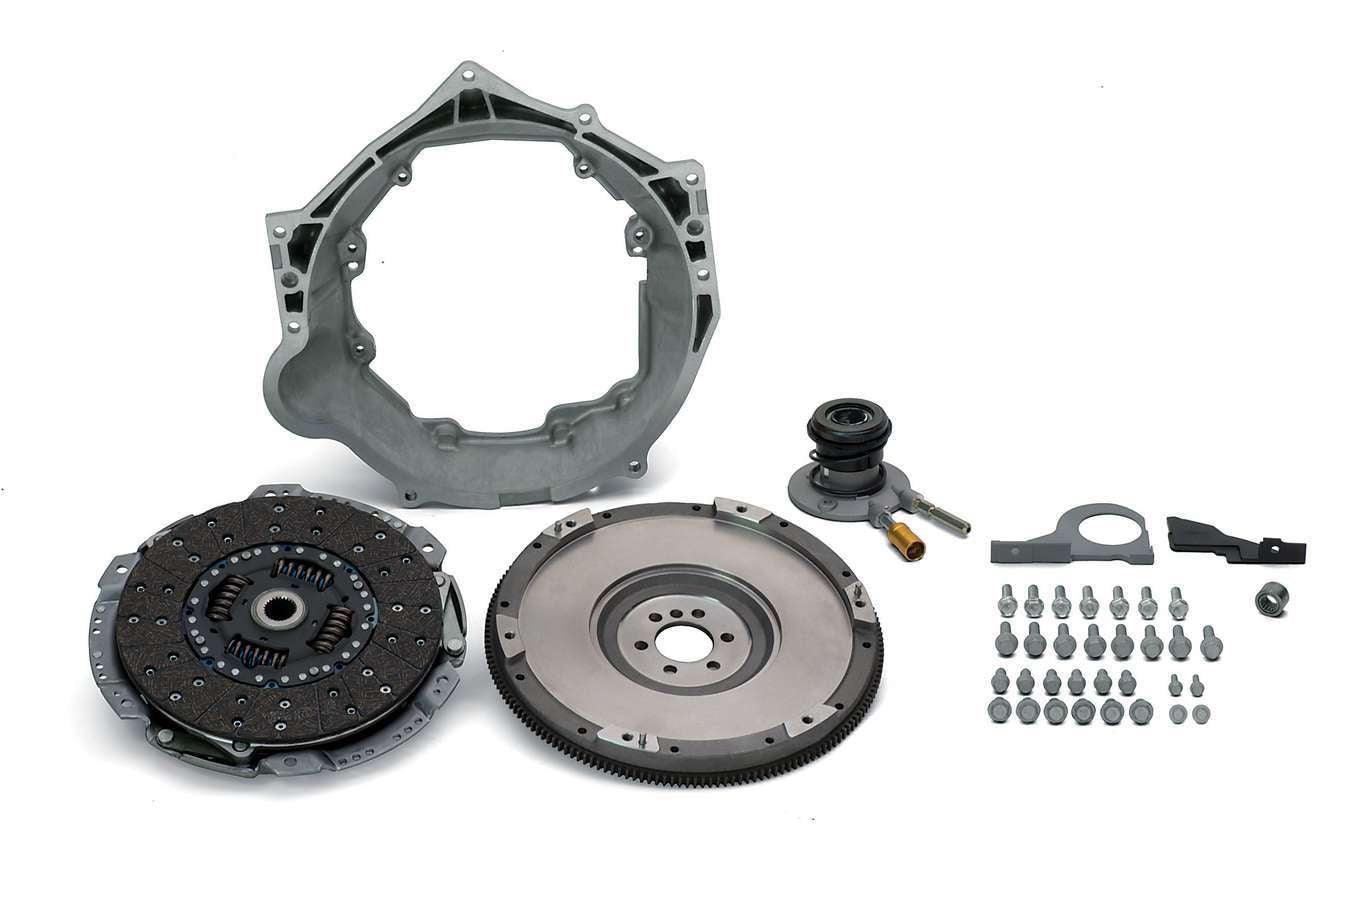 Trans Clutch Kit for 99-16 LS w/T56 Trans - Burlile Performance Products